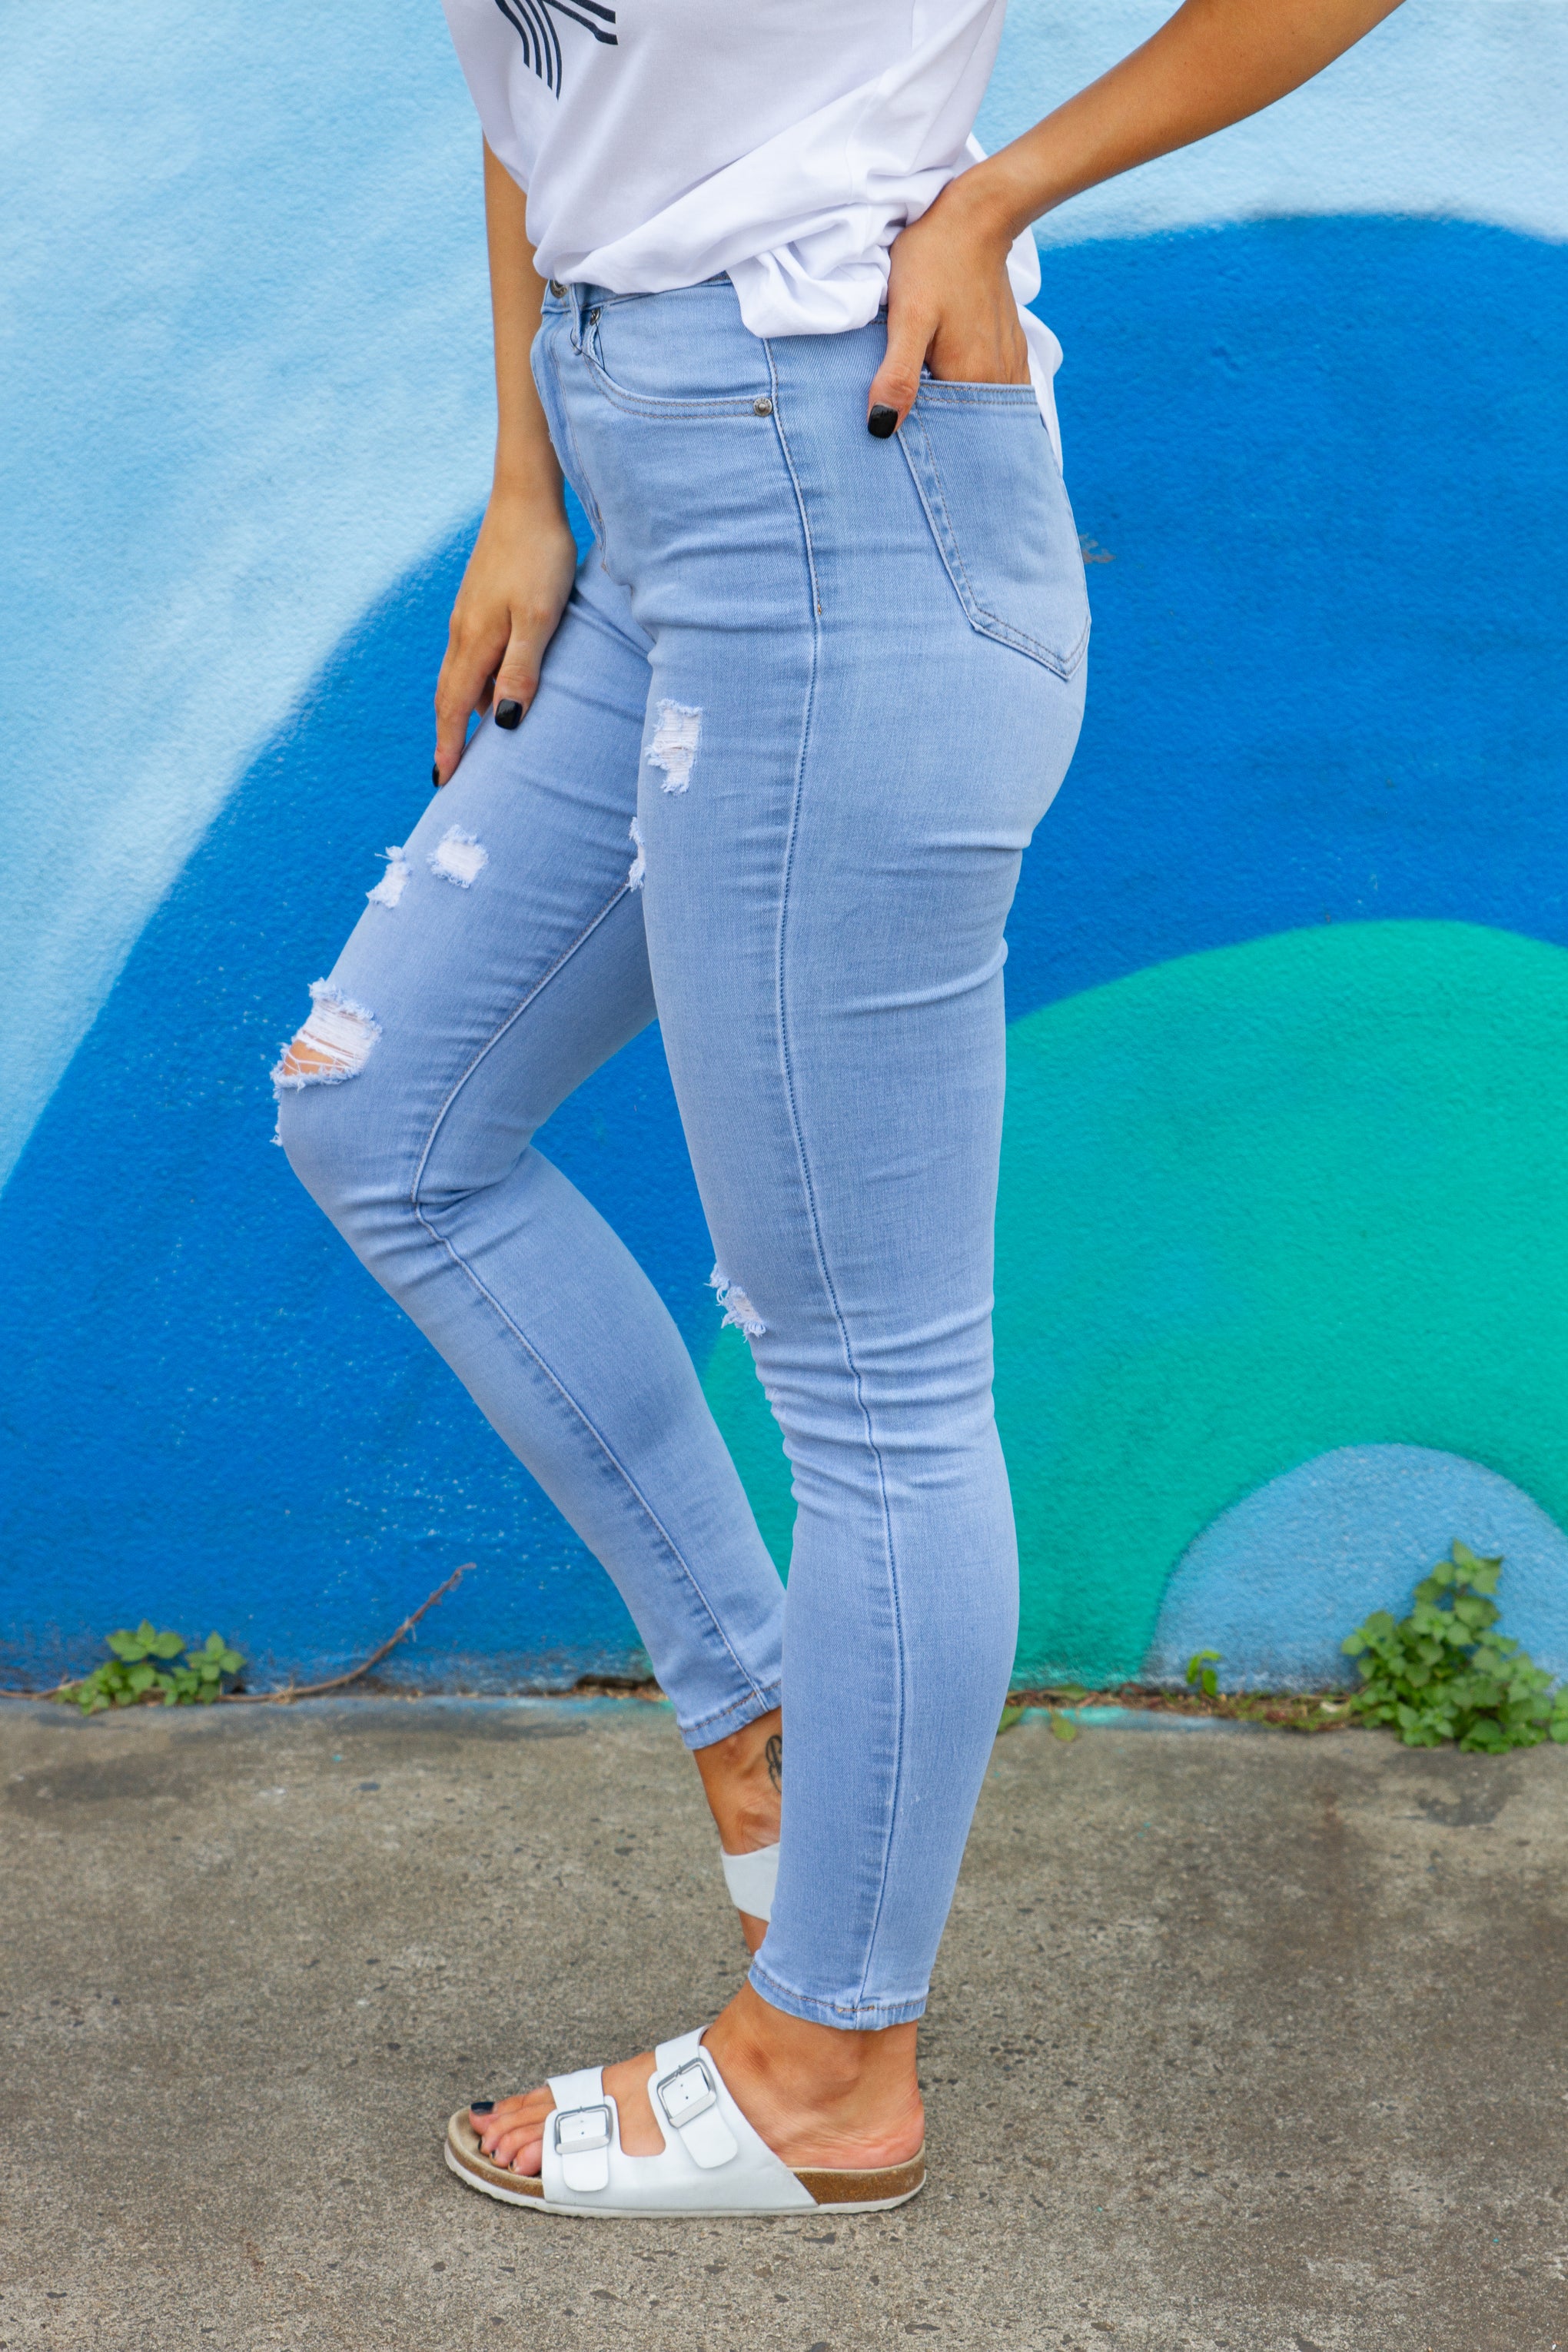 A little bit of edge to complete your denim selection. Our River Jeans are stretchy comfy & a great blue denim.   Details:  Distressed denim Skinny leg fit Functional pockets Light blue denim Sizing:  Elle wears a size 8 - true to size Fabric:  Cotton/Polyester/Elastane blend Measurements:   Size 16 Waist: 40cm Waist to ankle: 94cm Ankle: 16cm